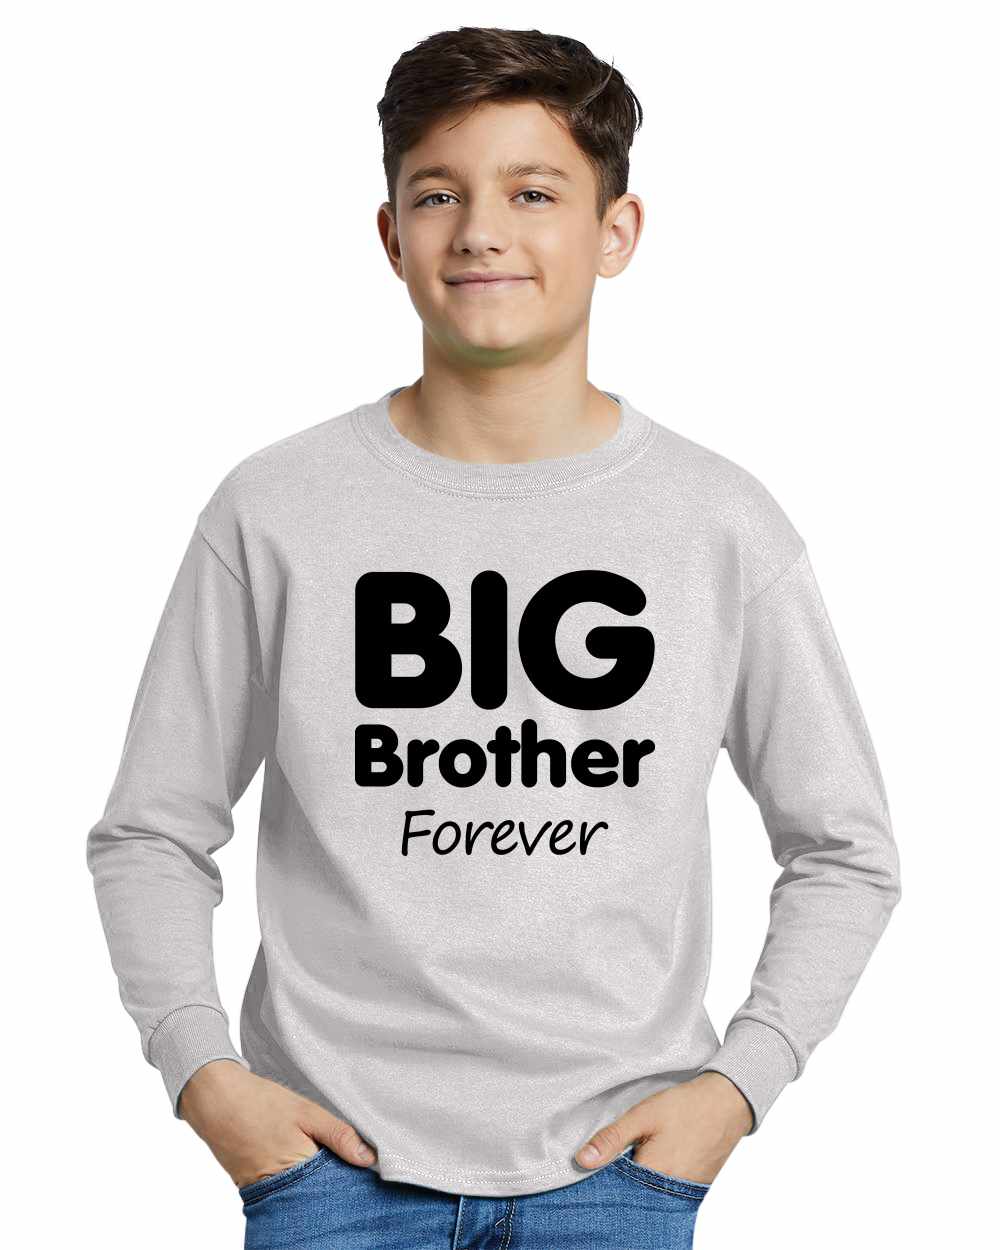 Big Brother Forever on Youth Long Sleeve Shirt (#952-203)